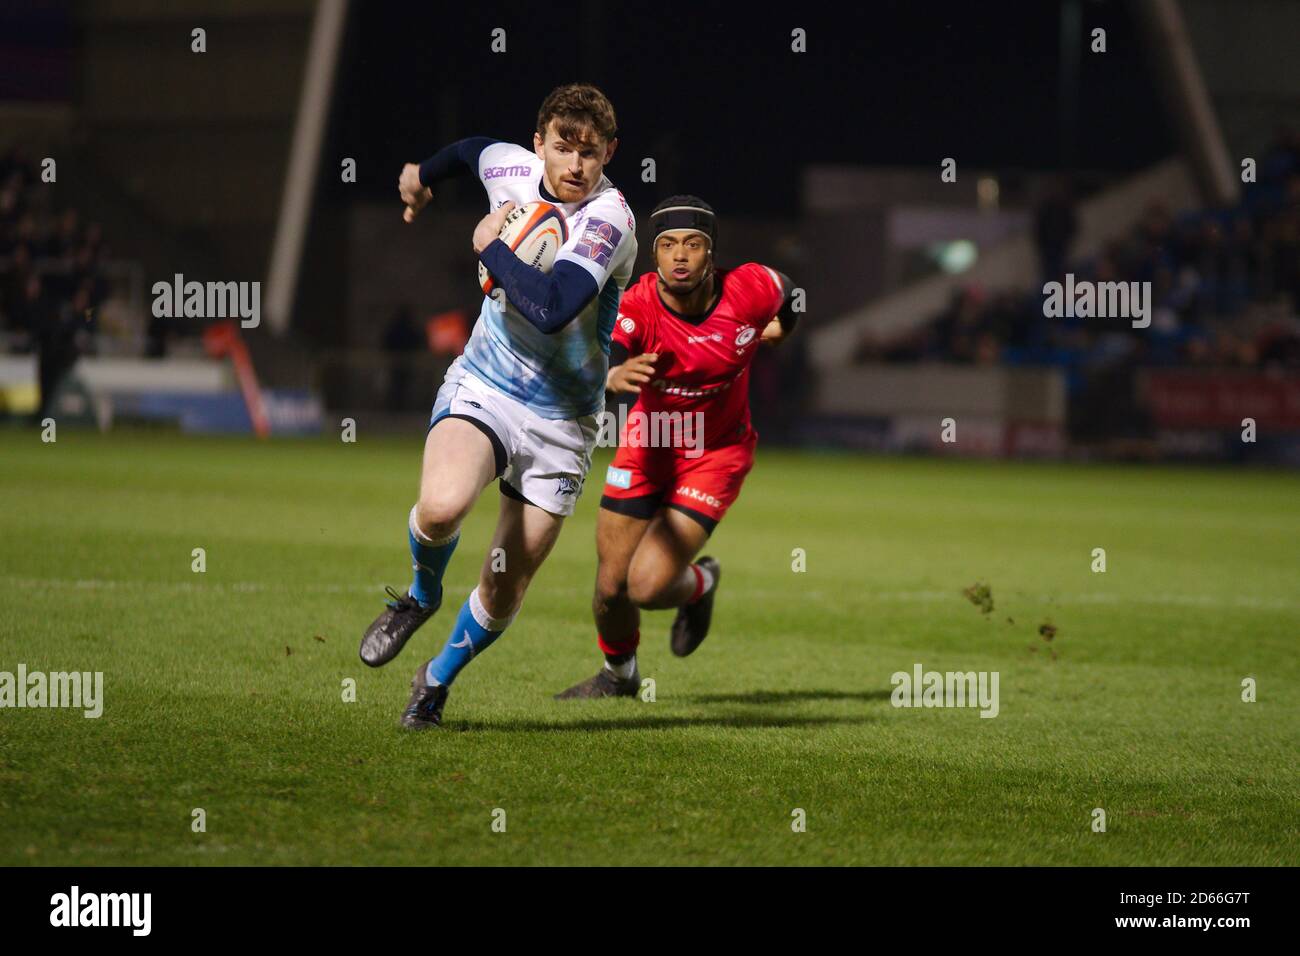 Manchester, England, 7 February 2020. Elliot Obatoyinbo of Saracens chasing Simon Hammersley of Sale Sharks who is running with the ball during their Gallagher Premiership Cup semi final match at the A J Bell Stadium. Stock Photo